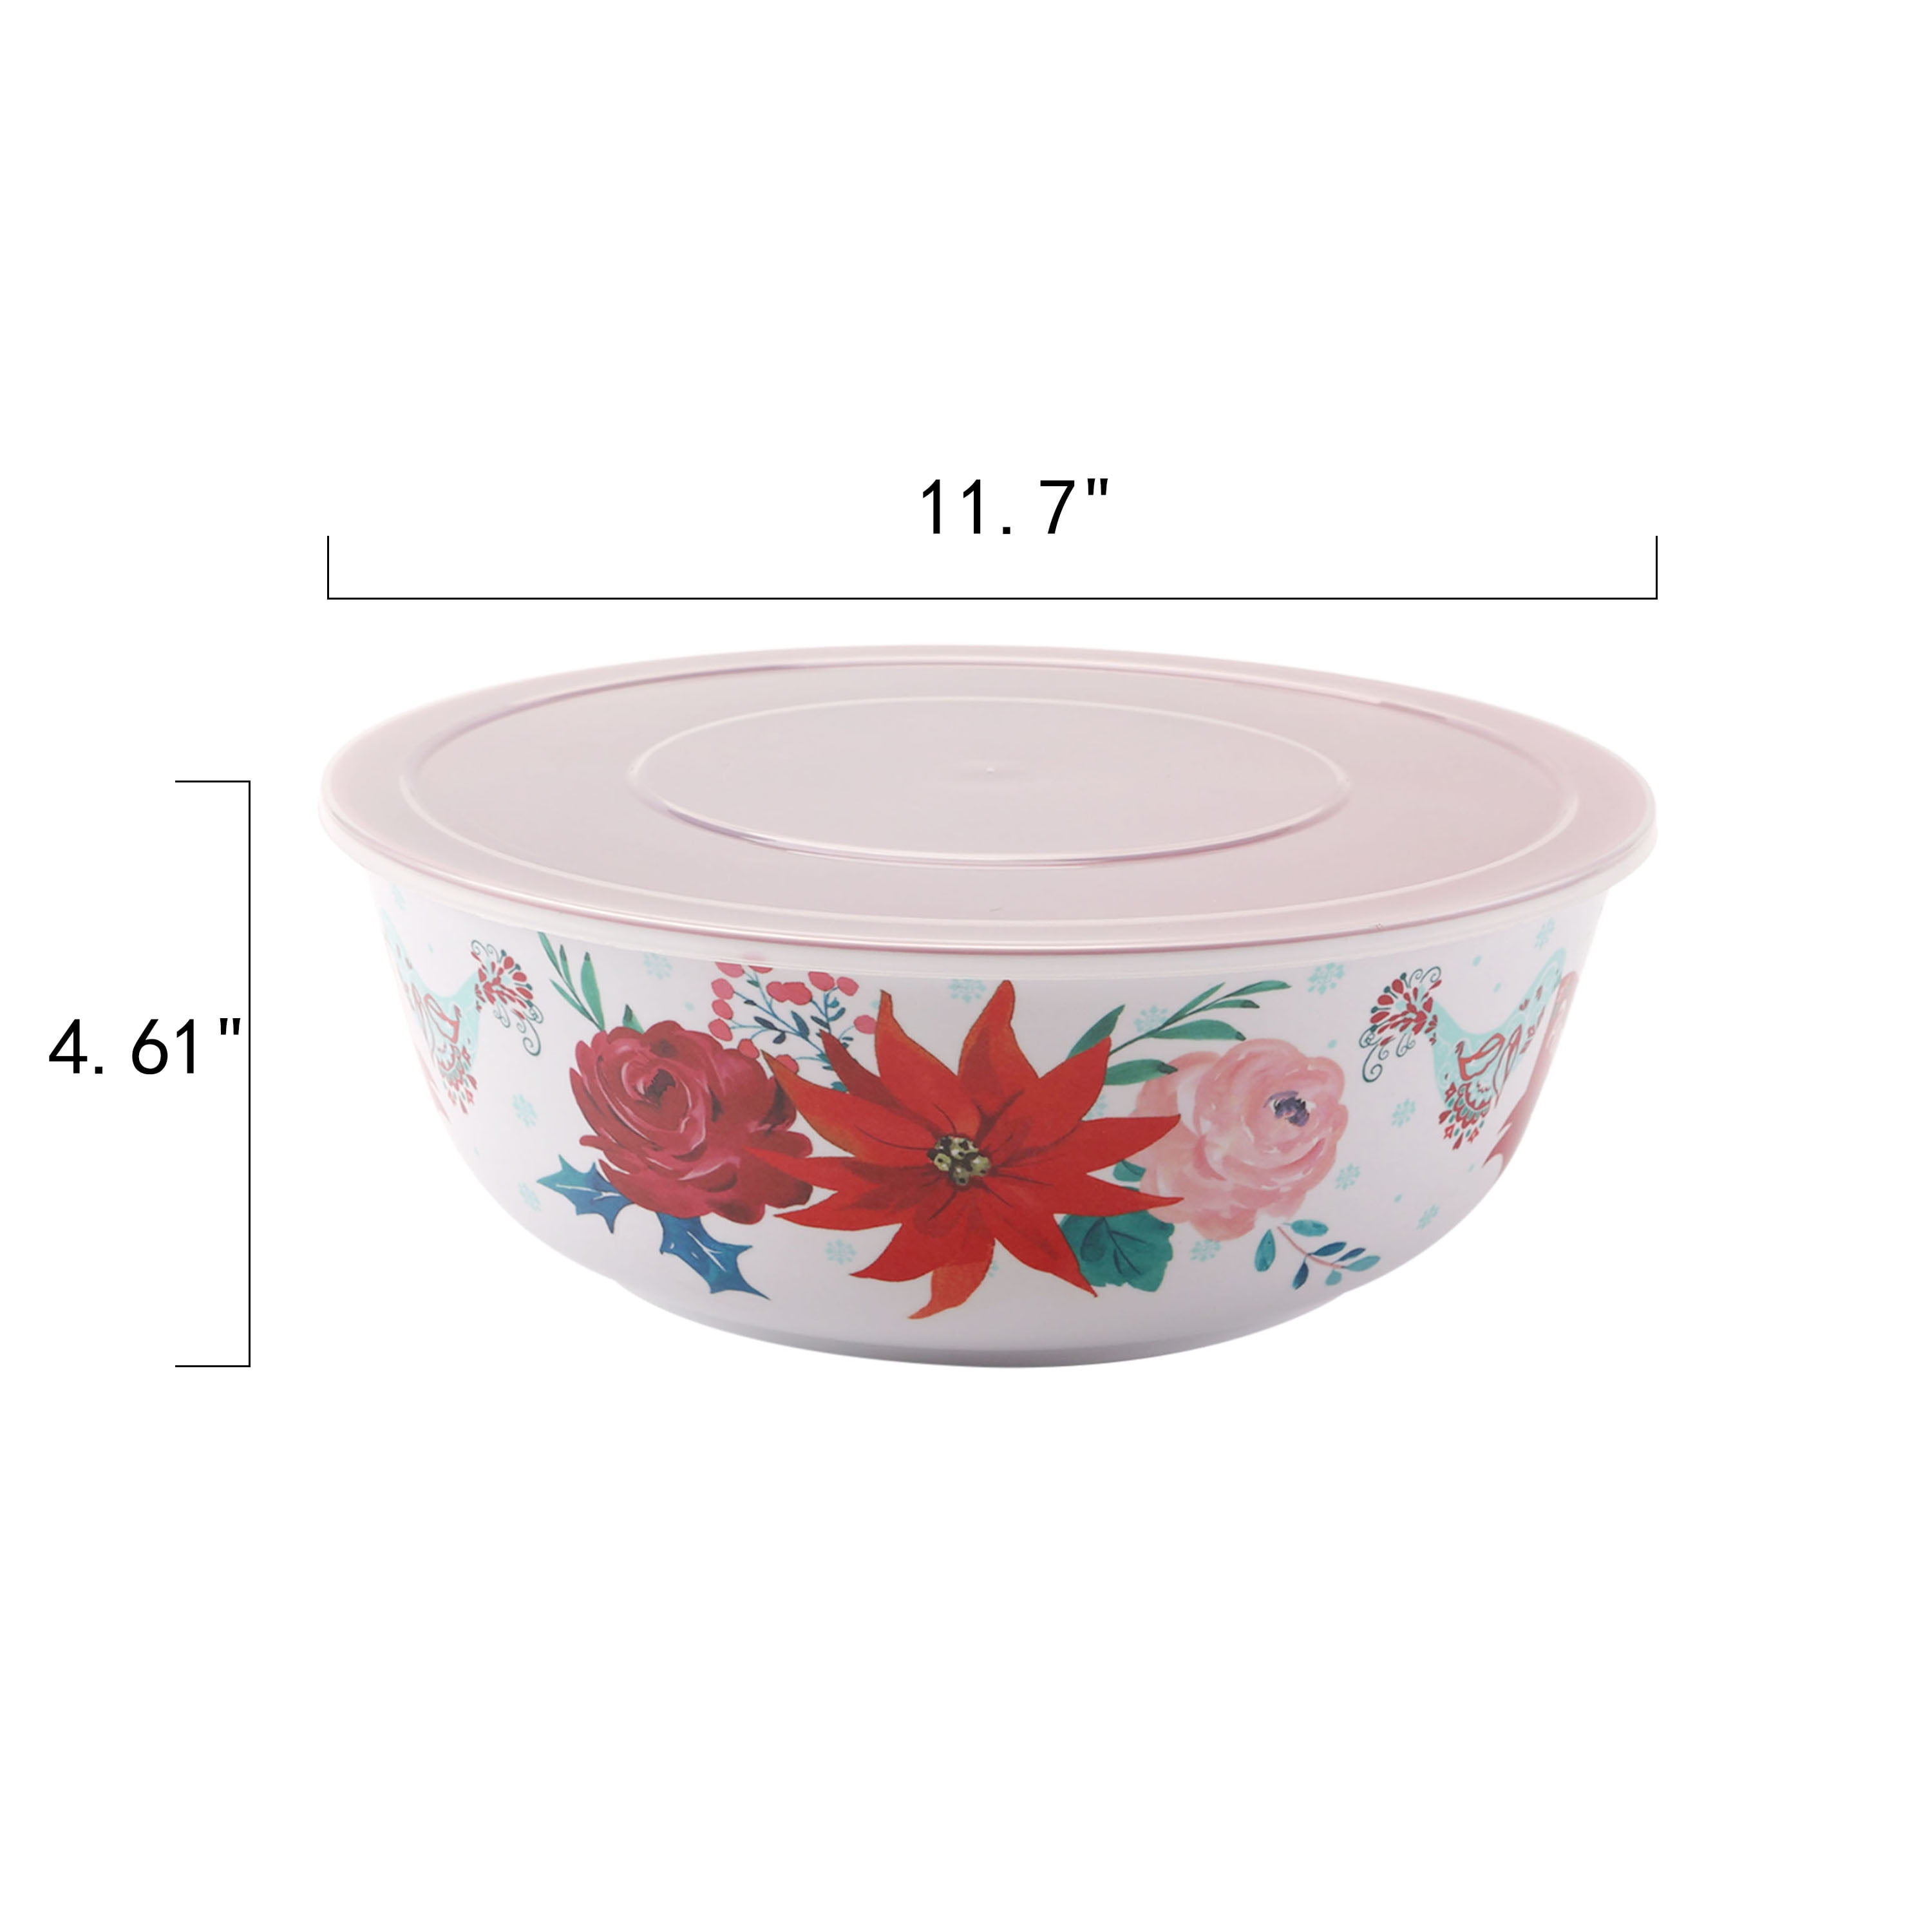 The Pioneer Woman Mixing Bowl Set with Lids, 18 Piece Set $28.44 (Reg.  $38.50) at Walmart!